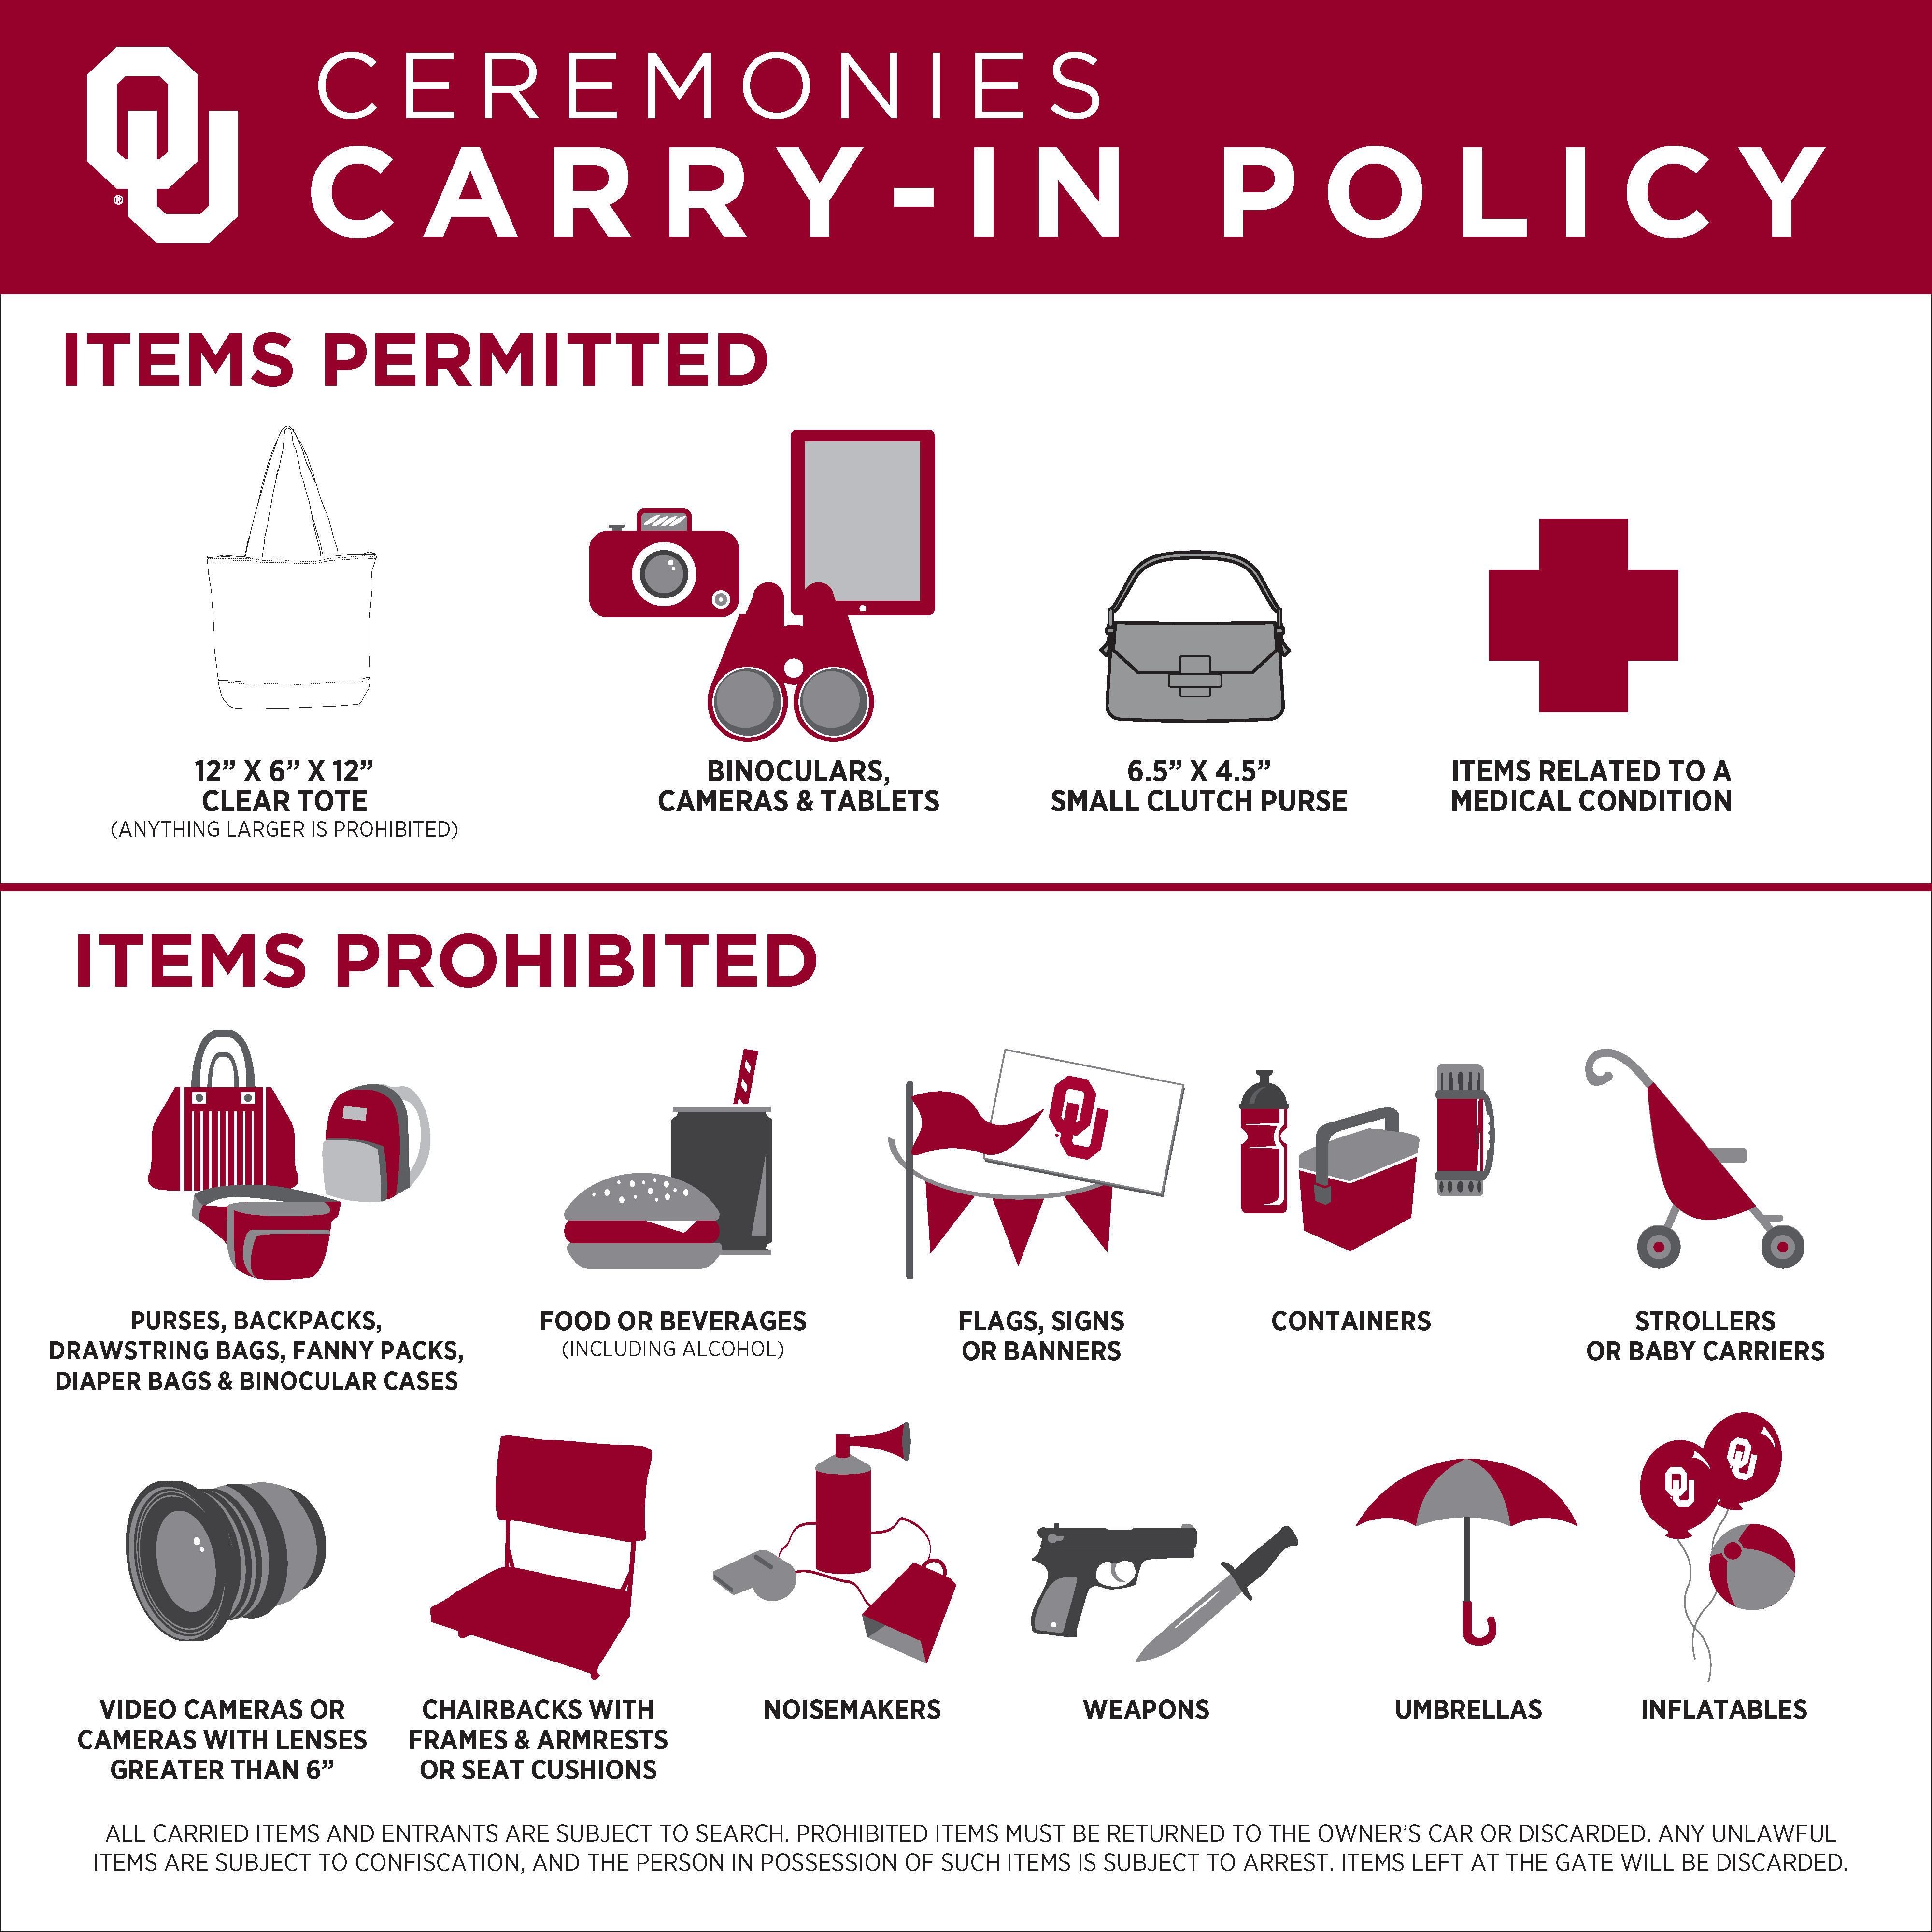 OU Ceremonies Carry-in Policy - Items permitted 12" x 6" x 12" Clear tote bag. Binoculars, cameras, tablets, 6.5" x 4.5" Small Clutch Purse, Items related to a medical condition. ITEMS PROHIBITED - Purses, backpacks, drawstring bags, fanny packs, diaper bags and binocular cases, Food or beverages, Flags, signs, or banners, containers, strollers or baby carriers, video cameras or cameras with lenses greater than 6", chairbacks with frames and armrests or seat cushions, noisemakers, weapons, umbrellas, inflatables. ALL CARRIED ITEMS AND ENTRANTS ARE SUBJECT TO SEARCH. PROHIBITED ITEMS MUST BE RETURNED TO THE OWNER'S CAR OR DISCARED. ANY UNLAWFUL ITEMS ARE SUBJECT TO CONFISCATION, AND THE PERSON IN POSSESSION OF SUCH ITEMS IS SUBJET TO ARREST. ITEMS LEFT AT THE GATE WILL BE DISCARDED. 